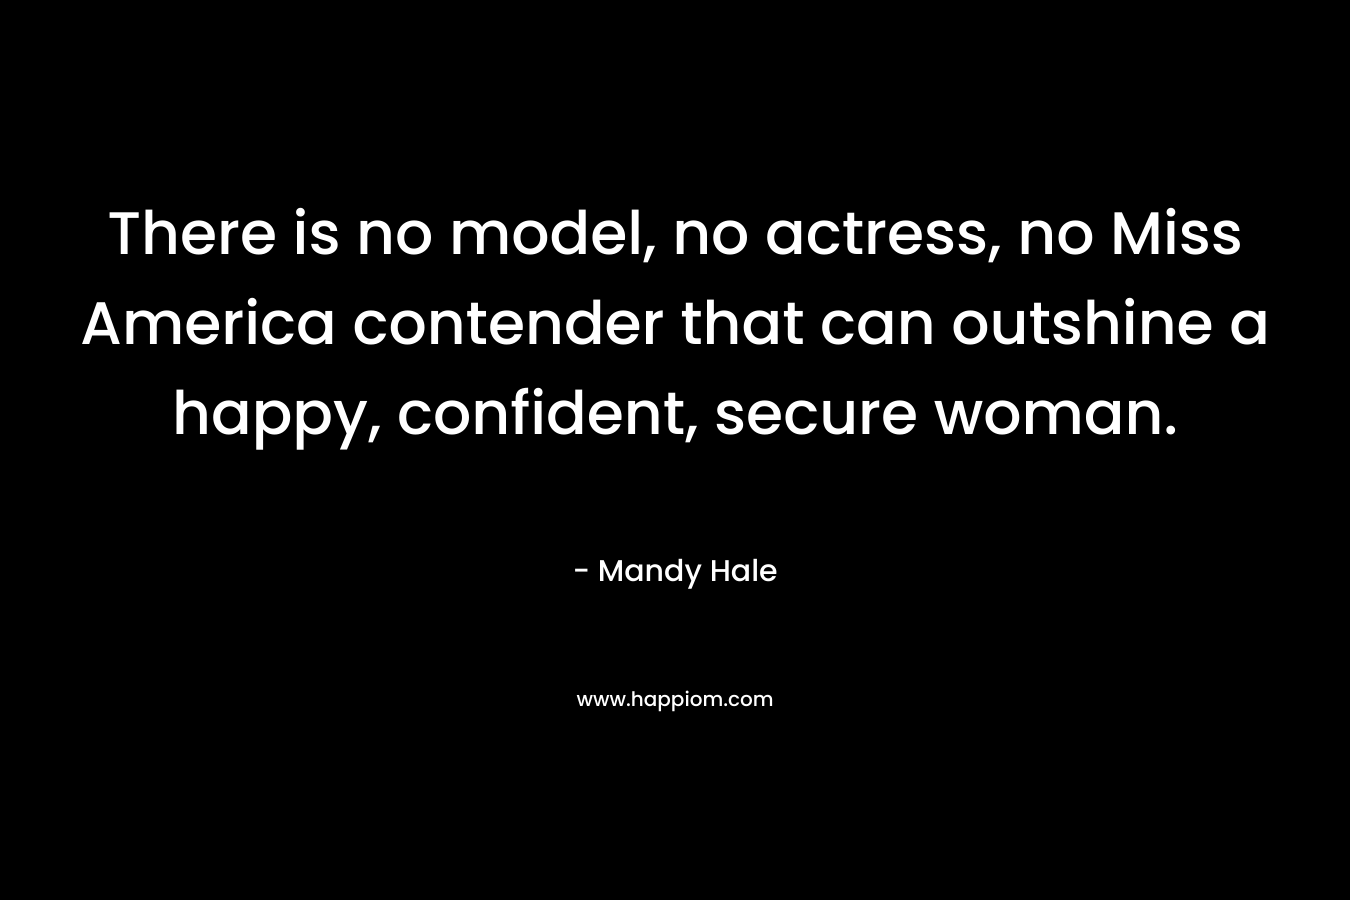 There is no model, no actress, no Miss America contender that can outshine a happy, confident, secure woman. – Mandy Hale